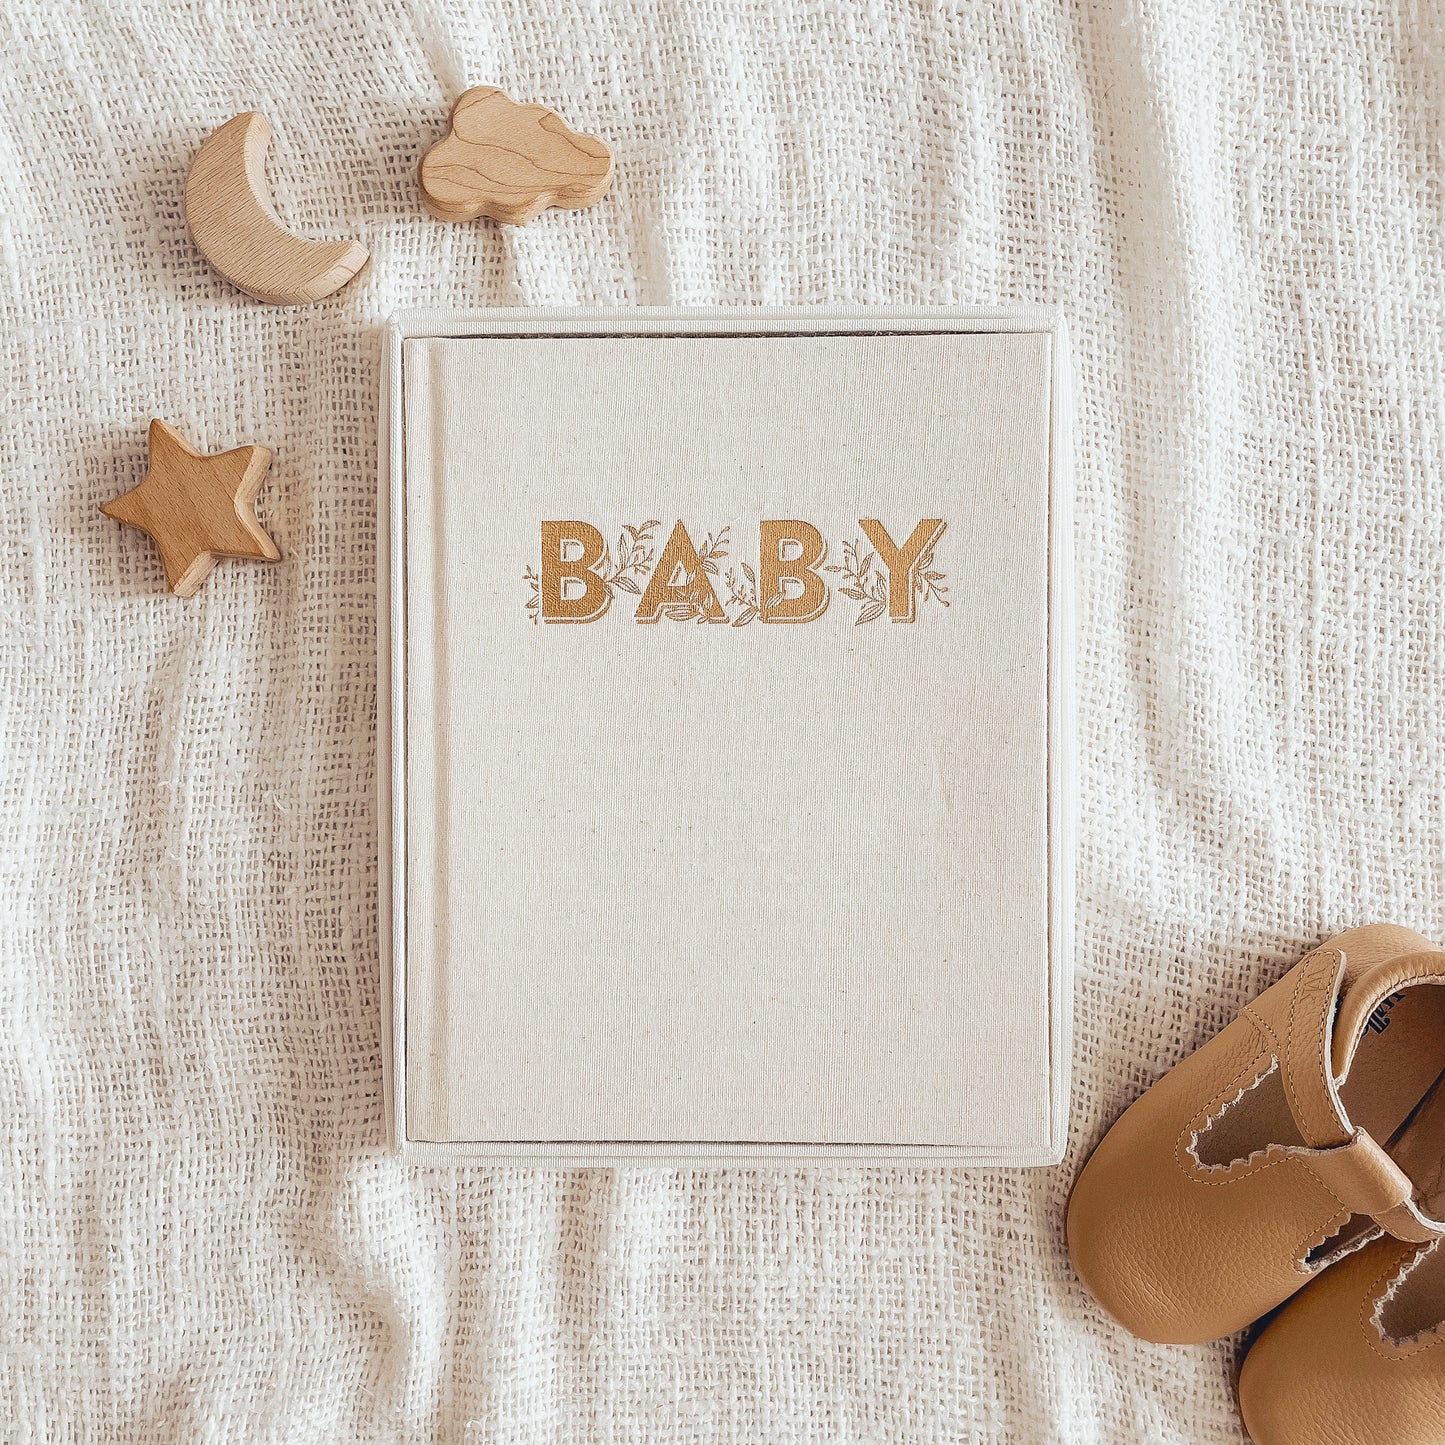 THE SWEET ONE - Baby Shower Gift Box